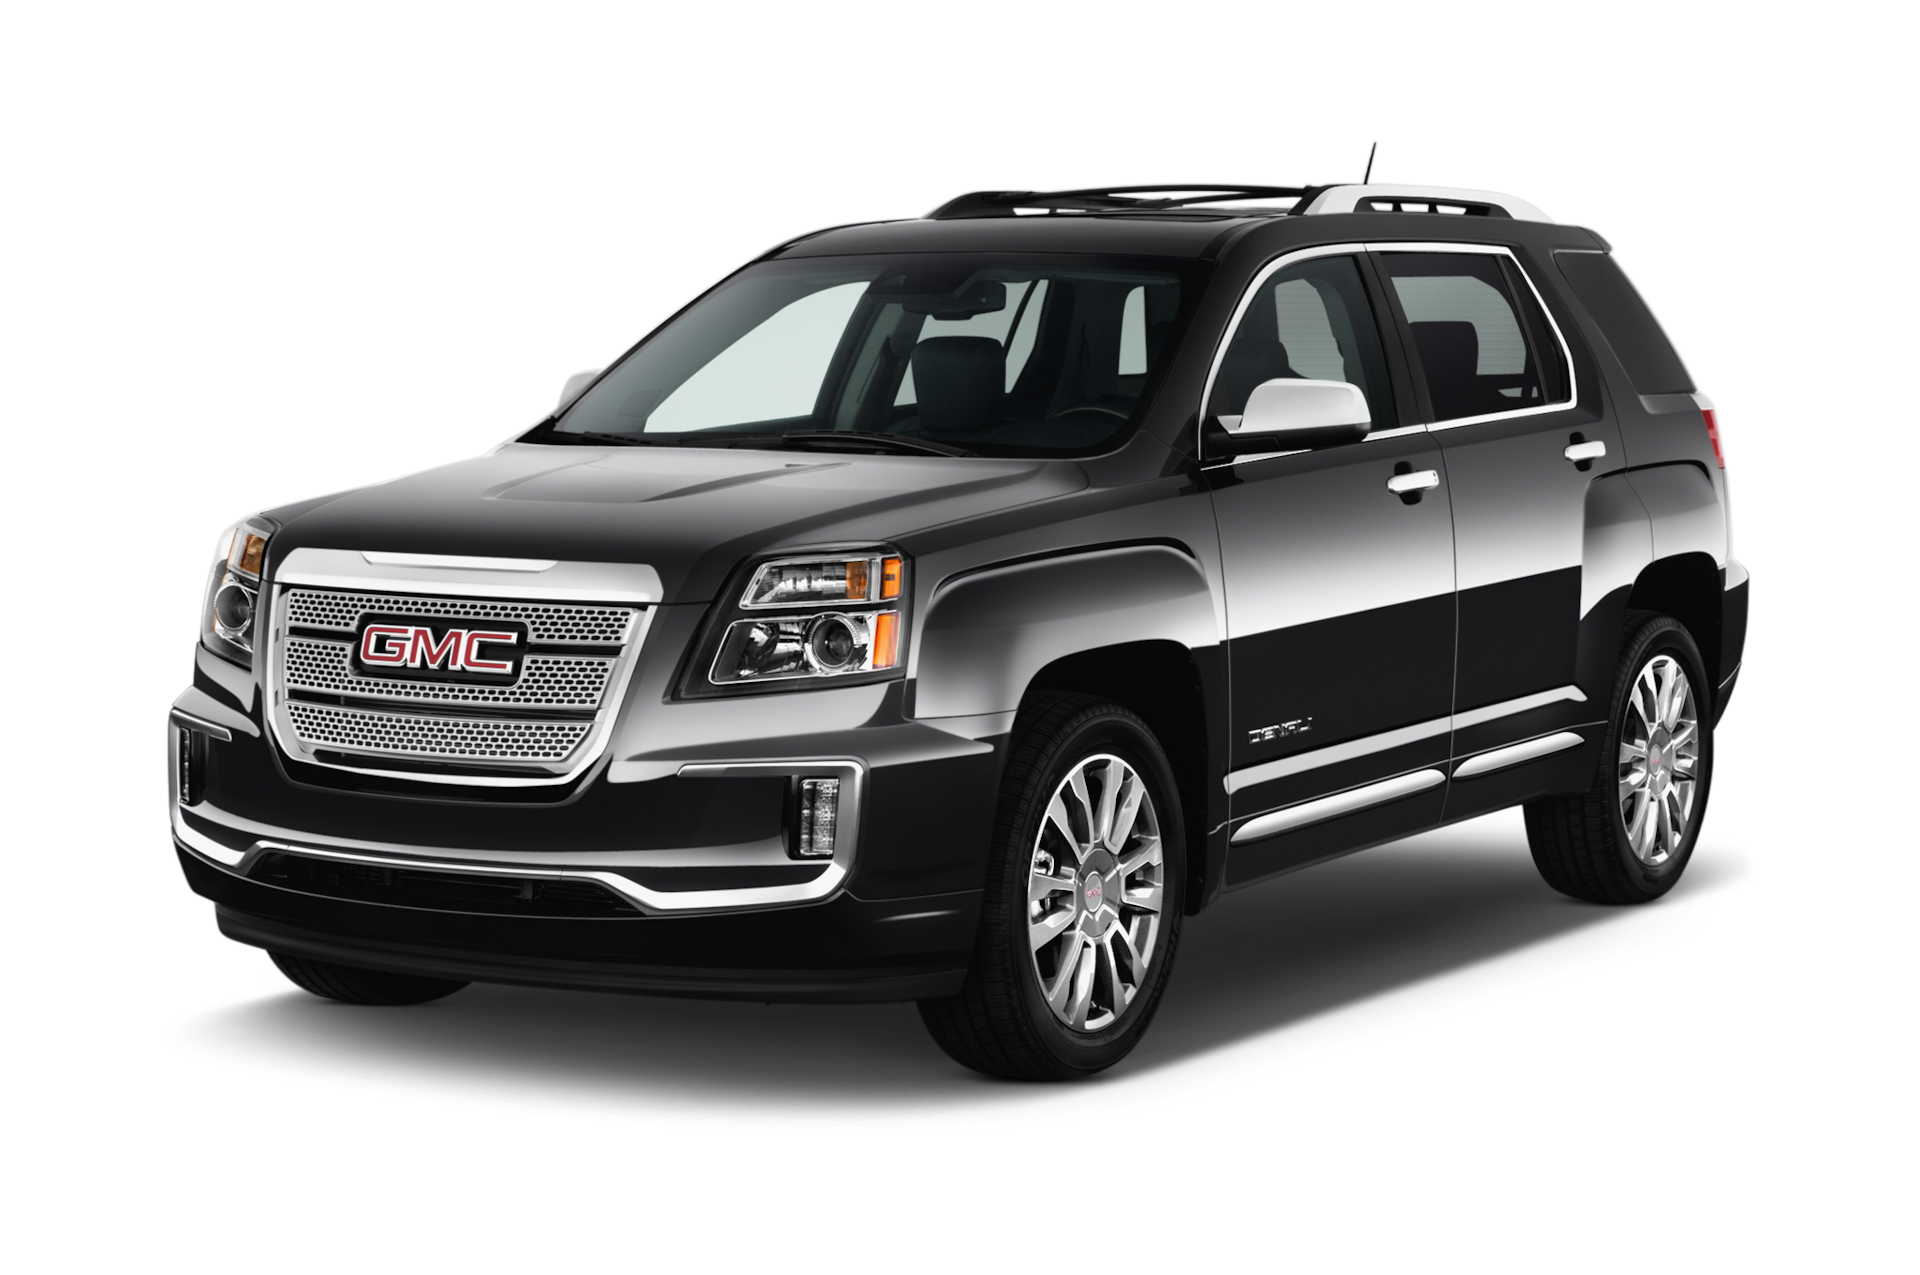 2016 GMC Terrain Prices, Reviews, and Photos - MotorTrend